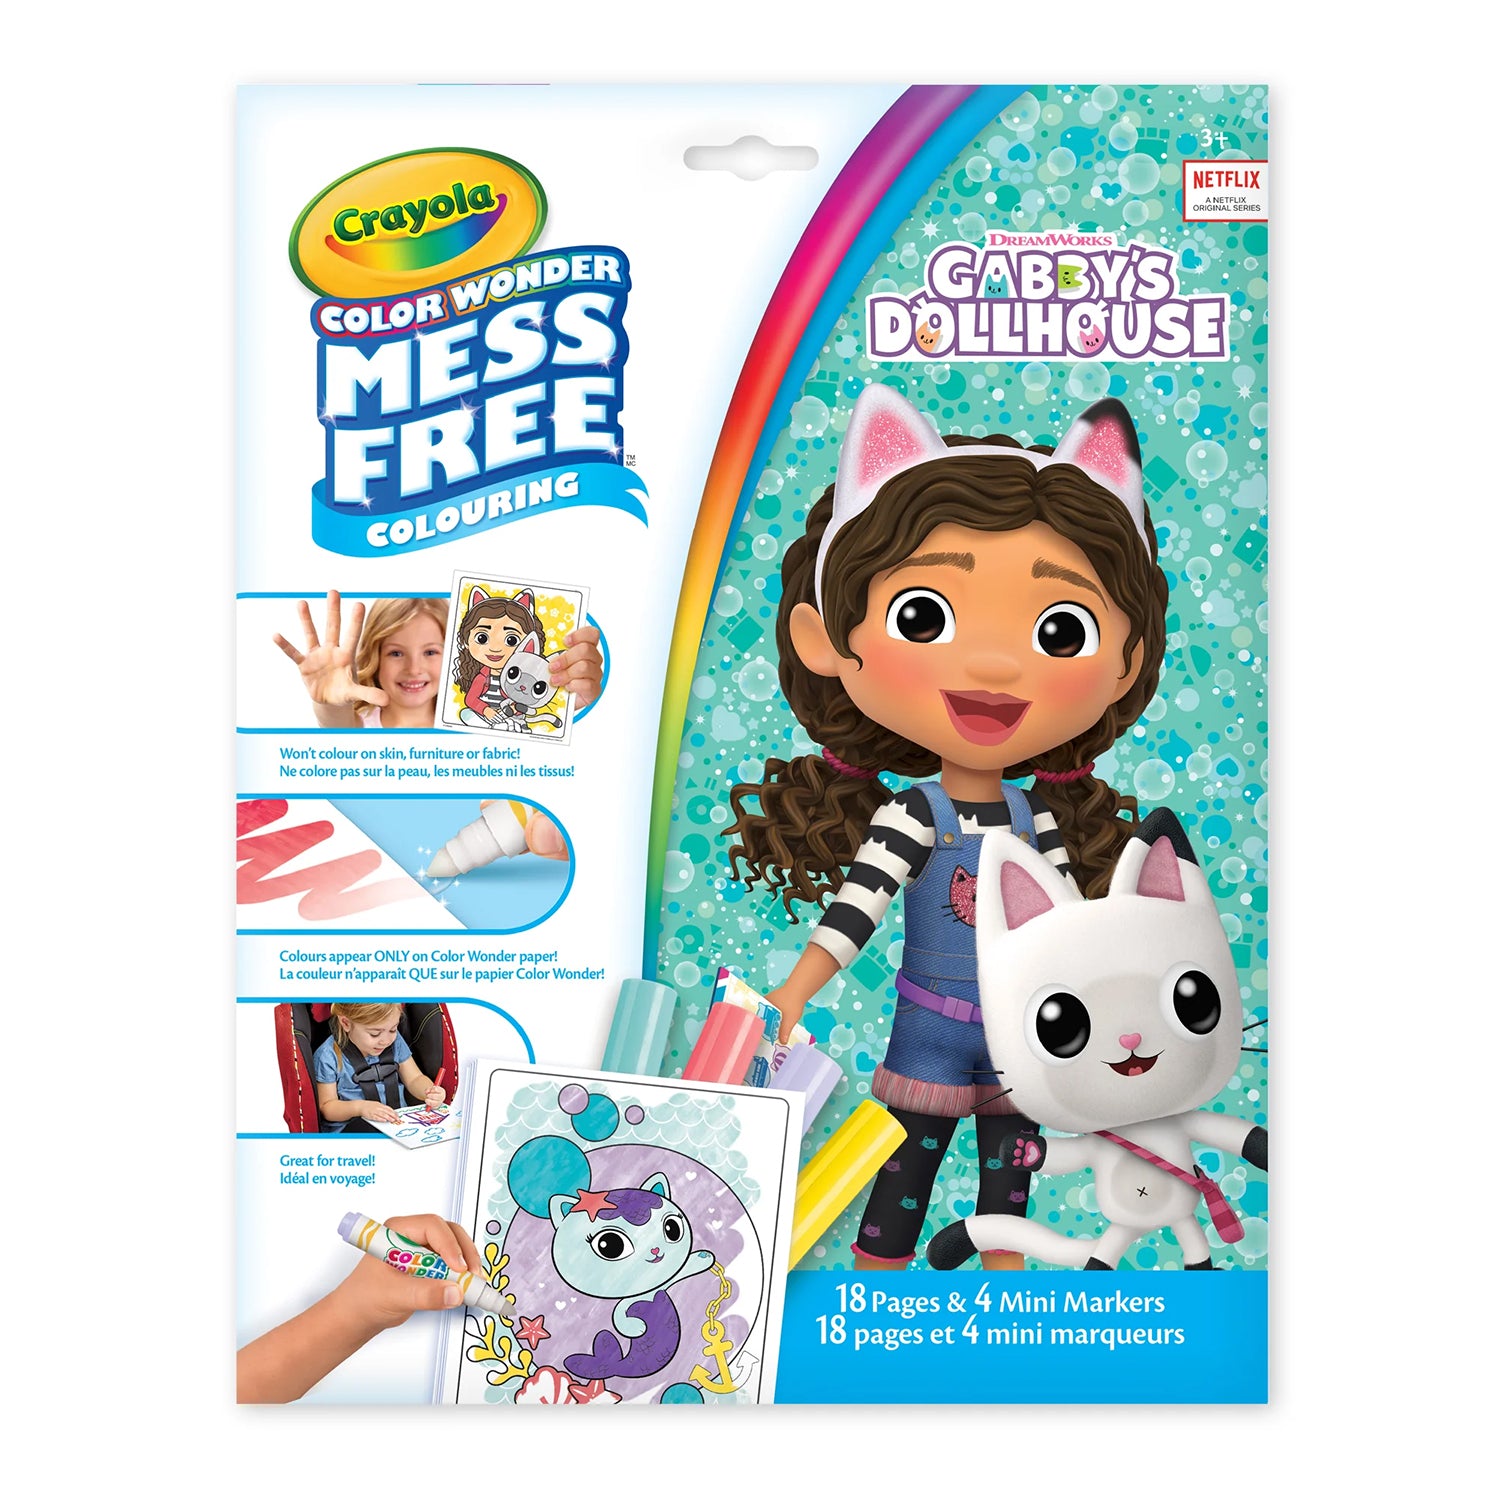 Crayola Color Wonder Mess-Free Coloring Pages & Mini Markers - Gabby's Dollhouse